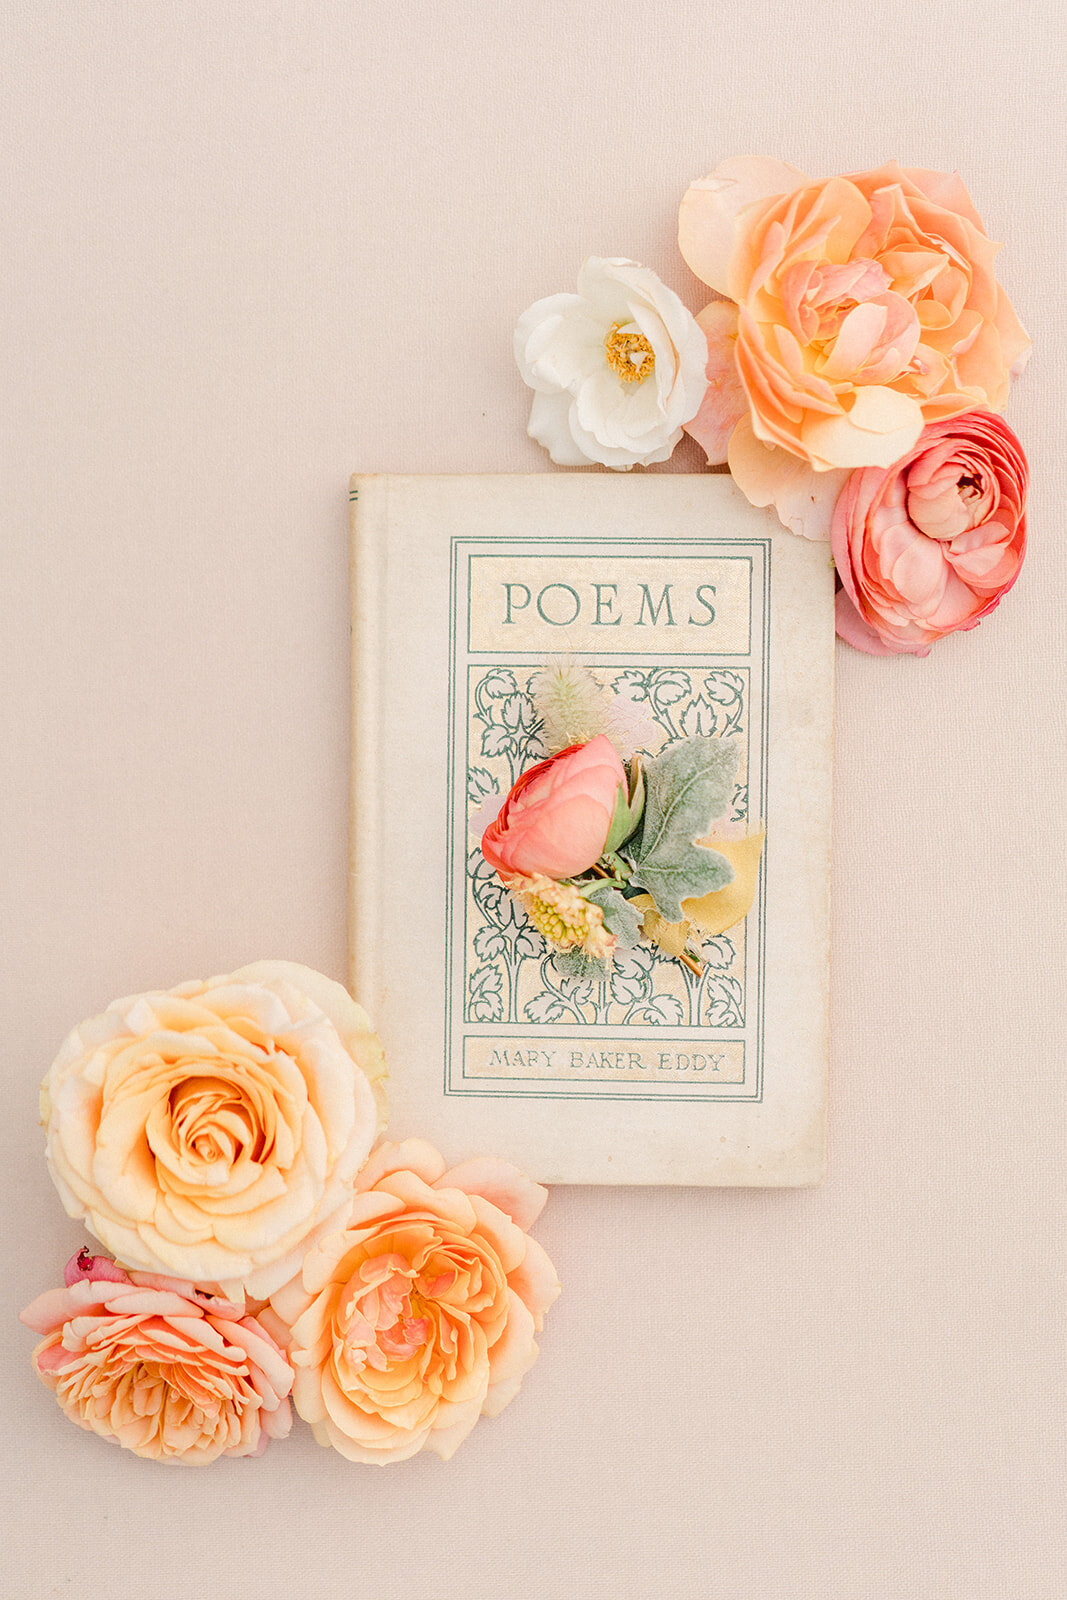 a book about poems with orange and pink florals on it